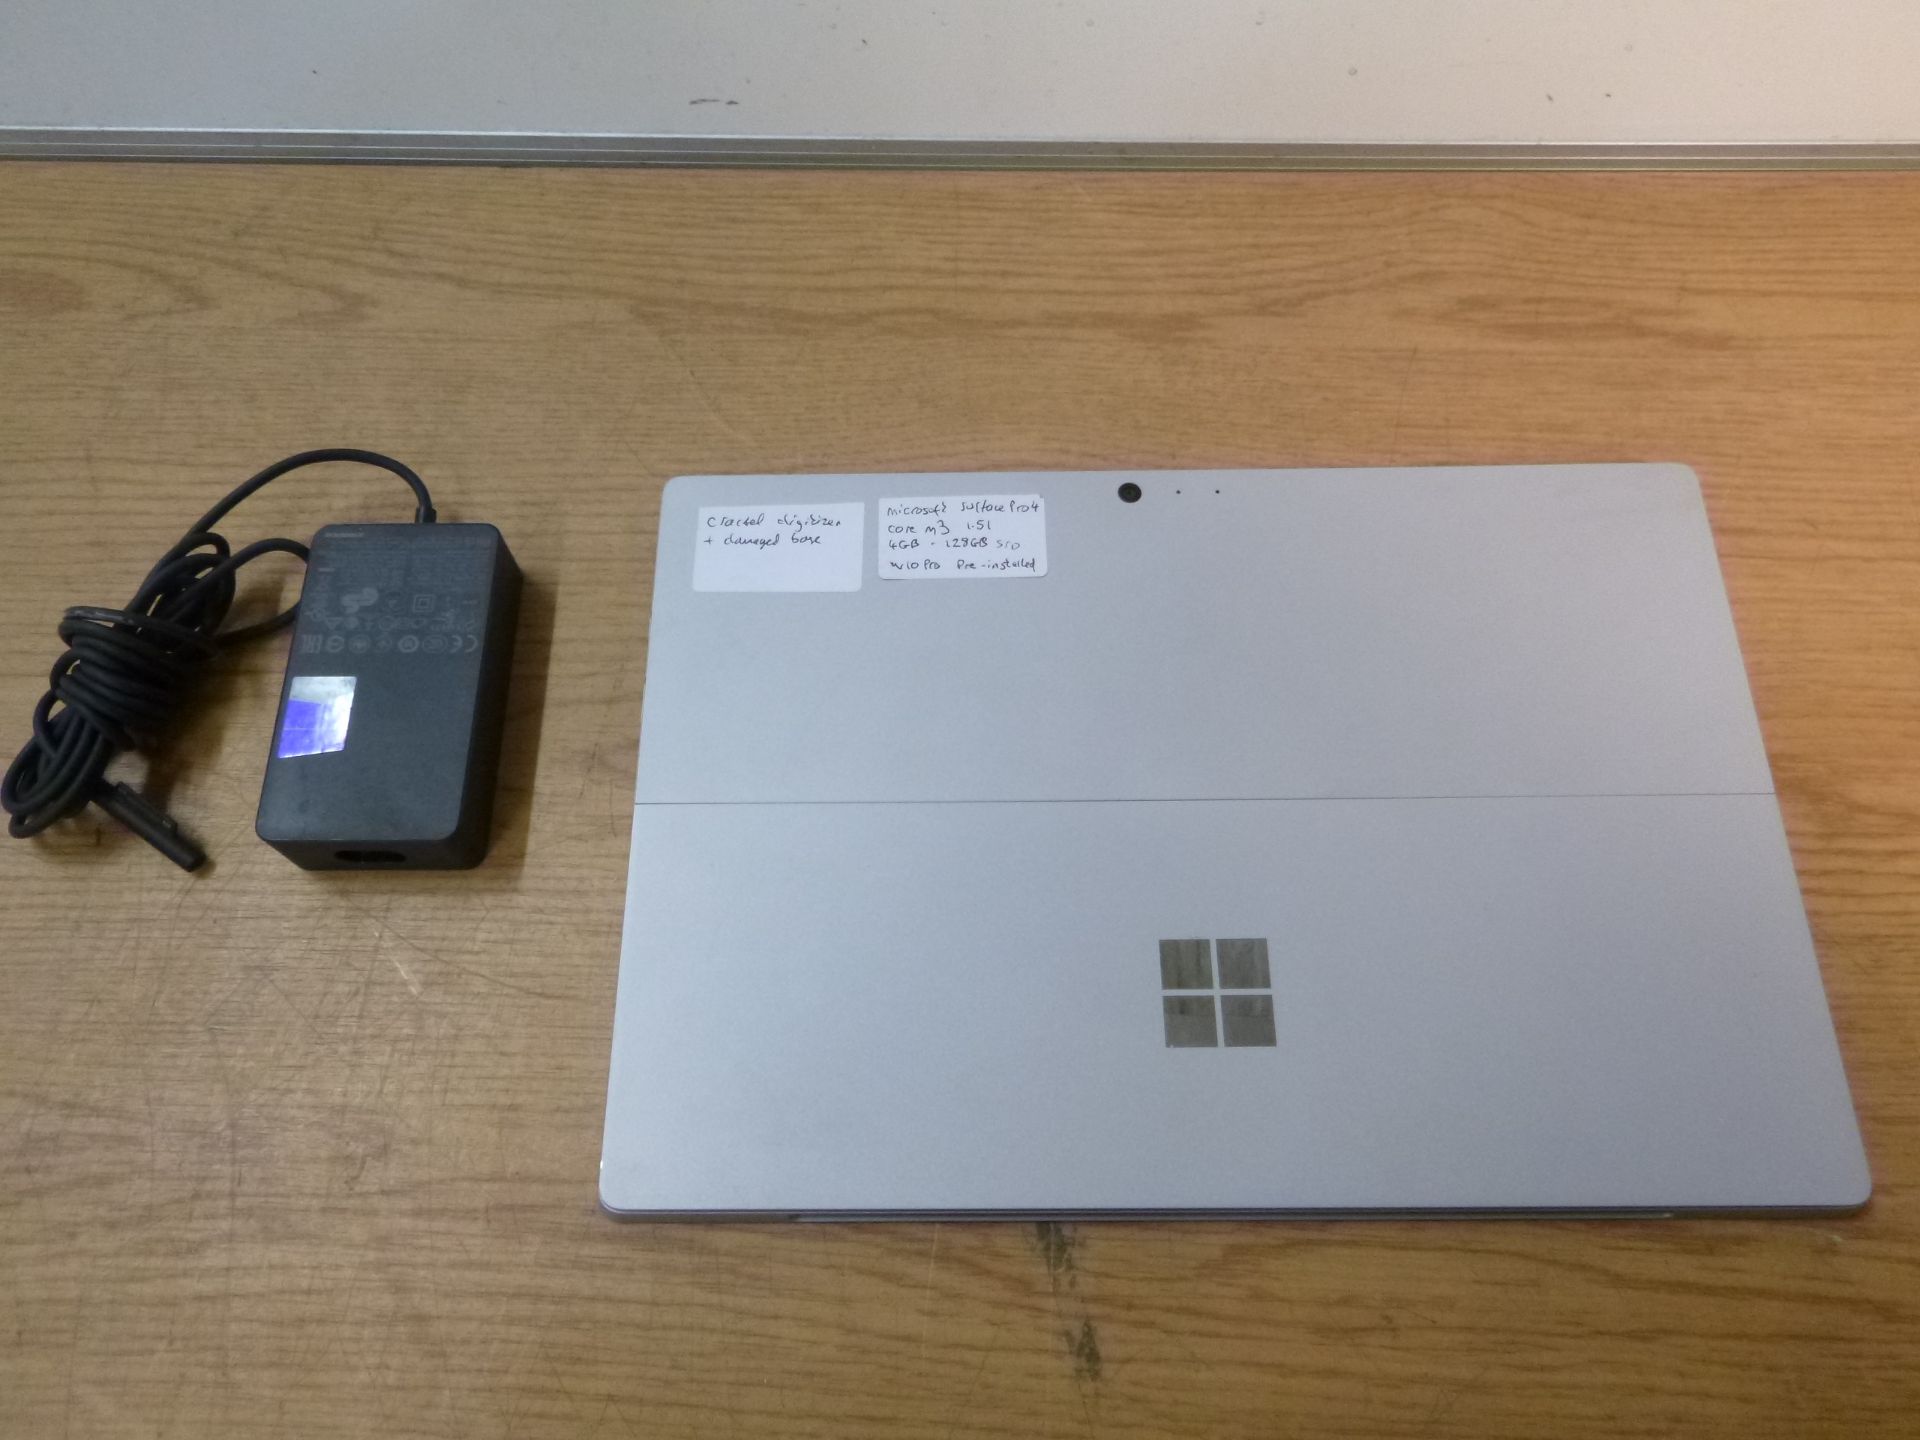 MICROSOFT SURFACE PRO 4 CORE M3 1.51GHZ, 4GB RAM, 128SSD, W10 PRE INSTALLED. WITH PSU. DAMAGED - Image 6 of 6